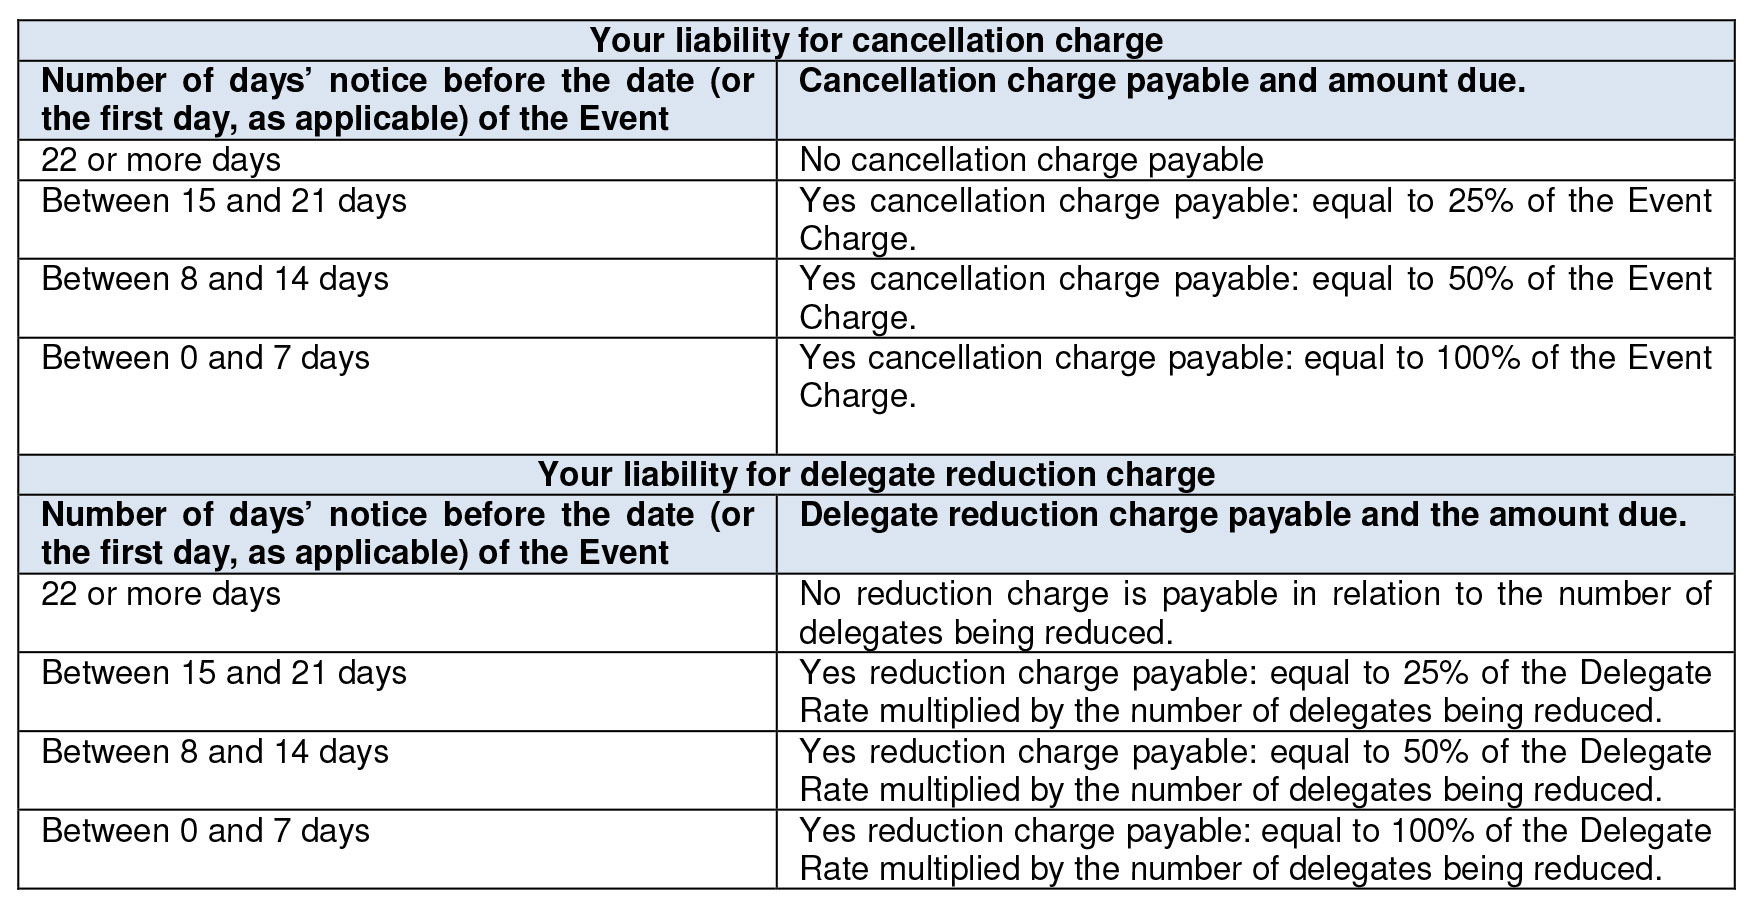 liability for cancellation charge